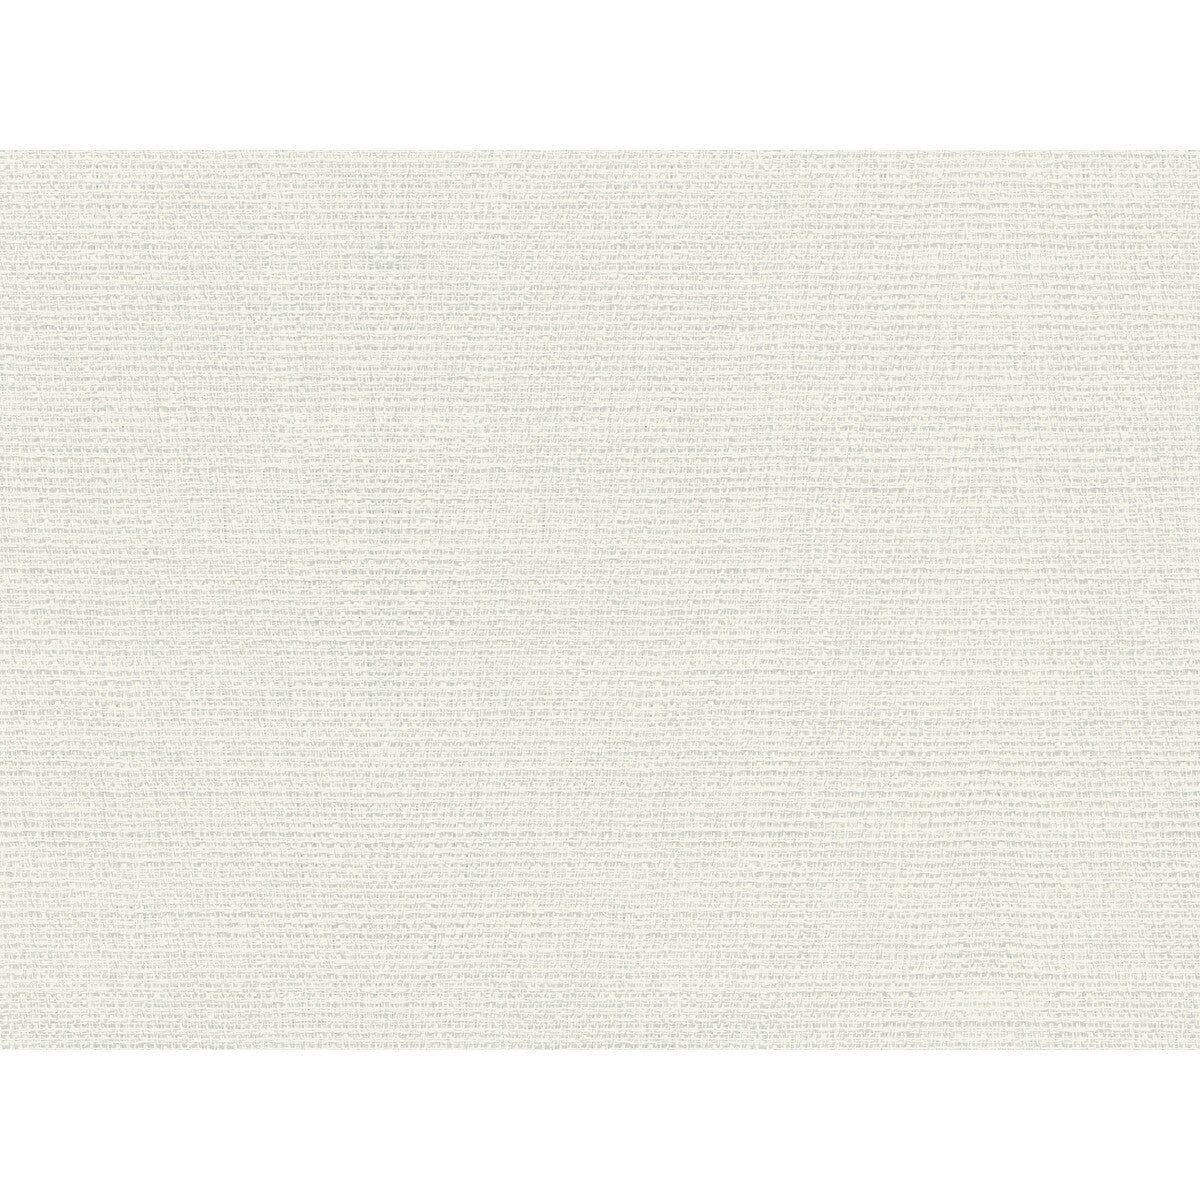 Kravet Contract fabric in 4521-101 color - pattern 4521.101.0 - by Kravet Contract